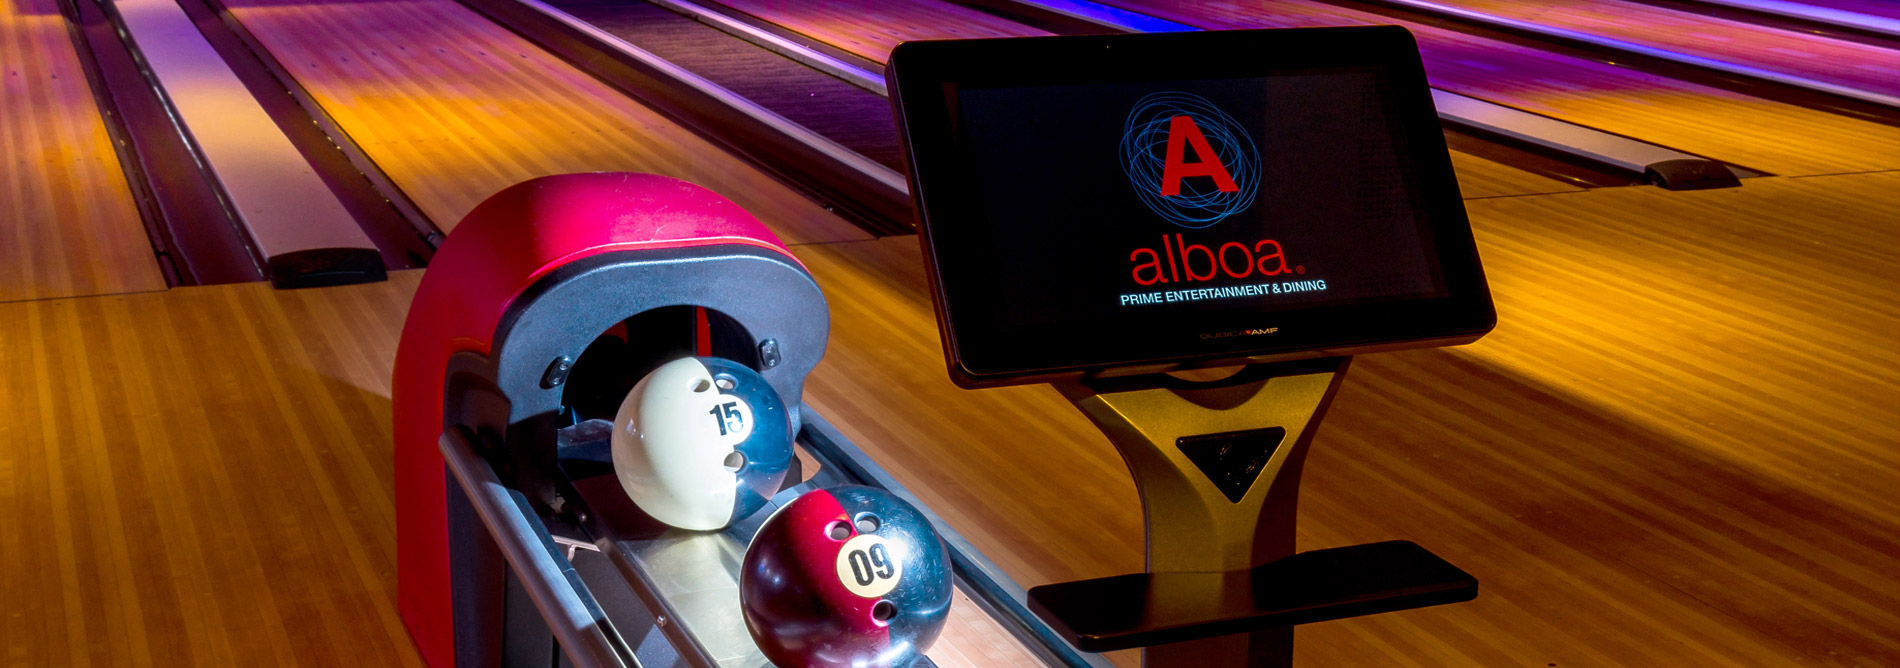 Bowling-QubicaAMF-score-bowler-consoles--features-banner.jpg